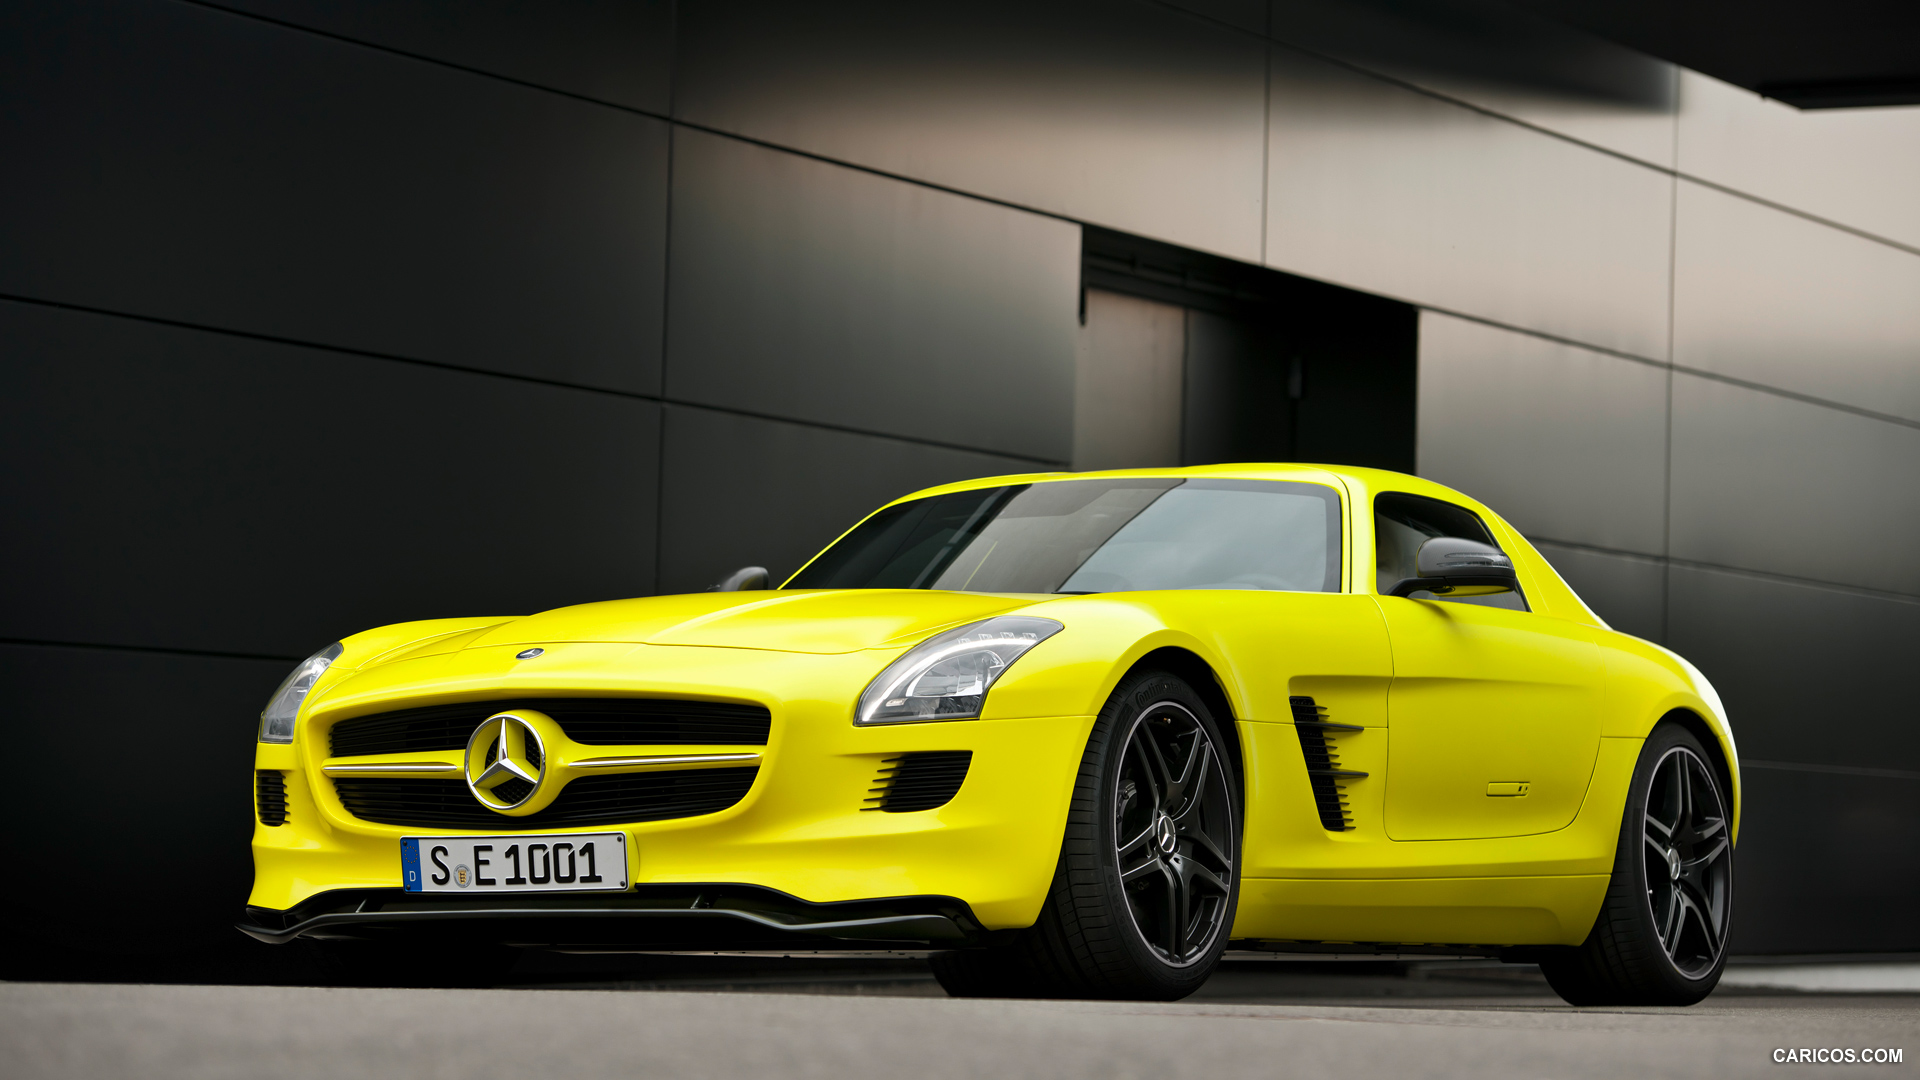 Mercedes-Benz SLS AMG E-CELL Concept  - Front, #46 of 60